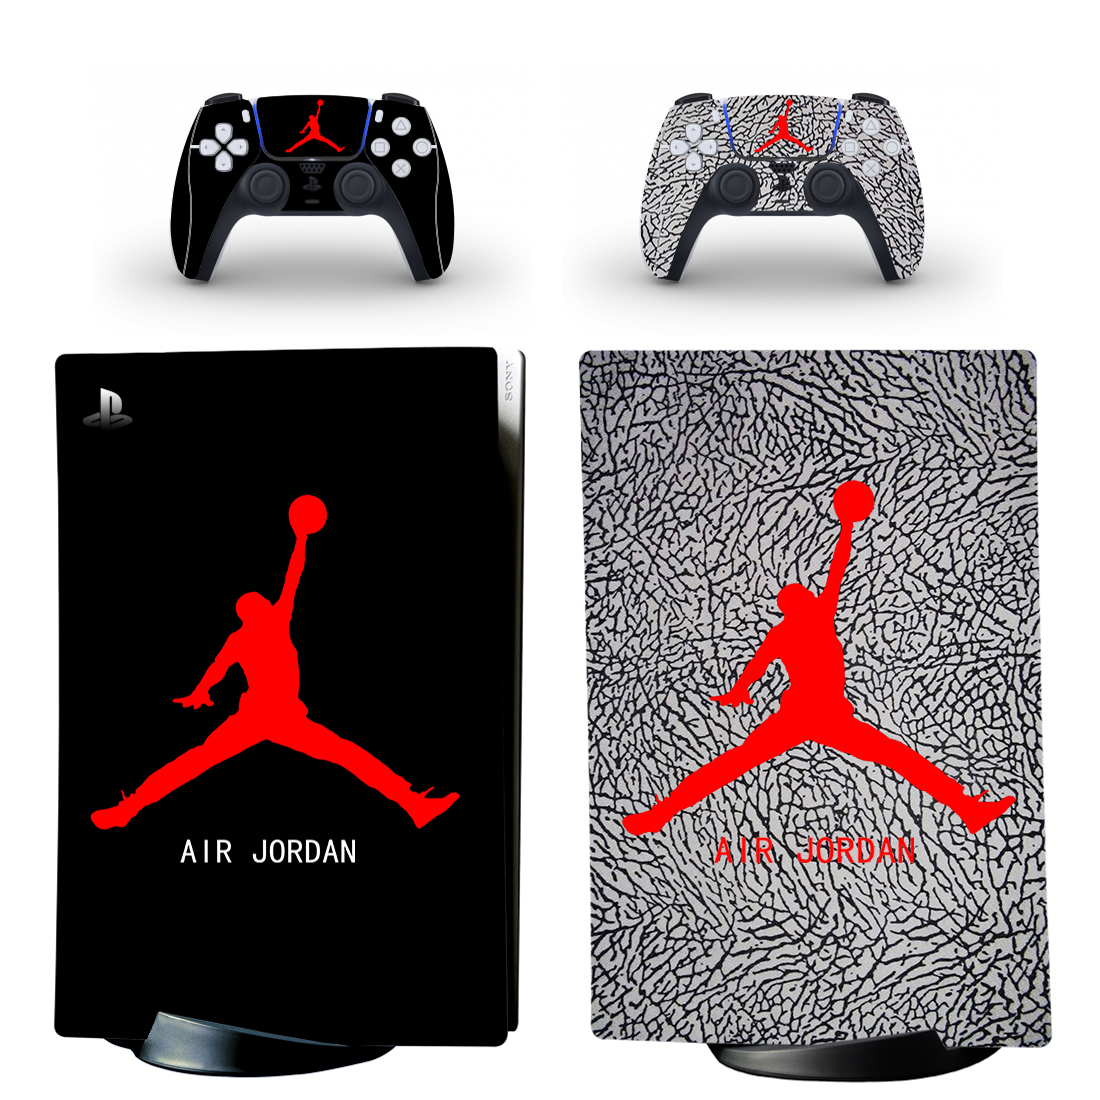 Louis Vuitton Skin Sticker Decal For PlayStation 5 - ConsoleSkins.co